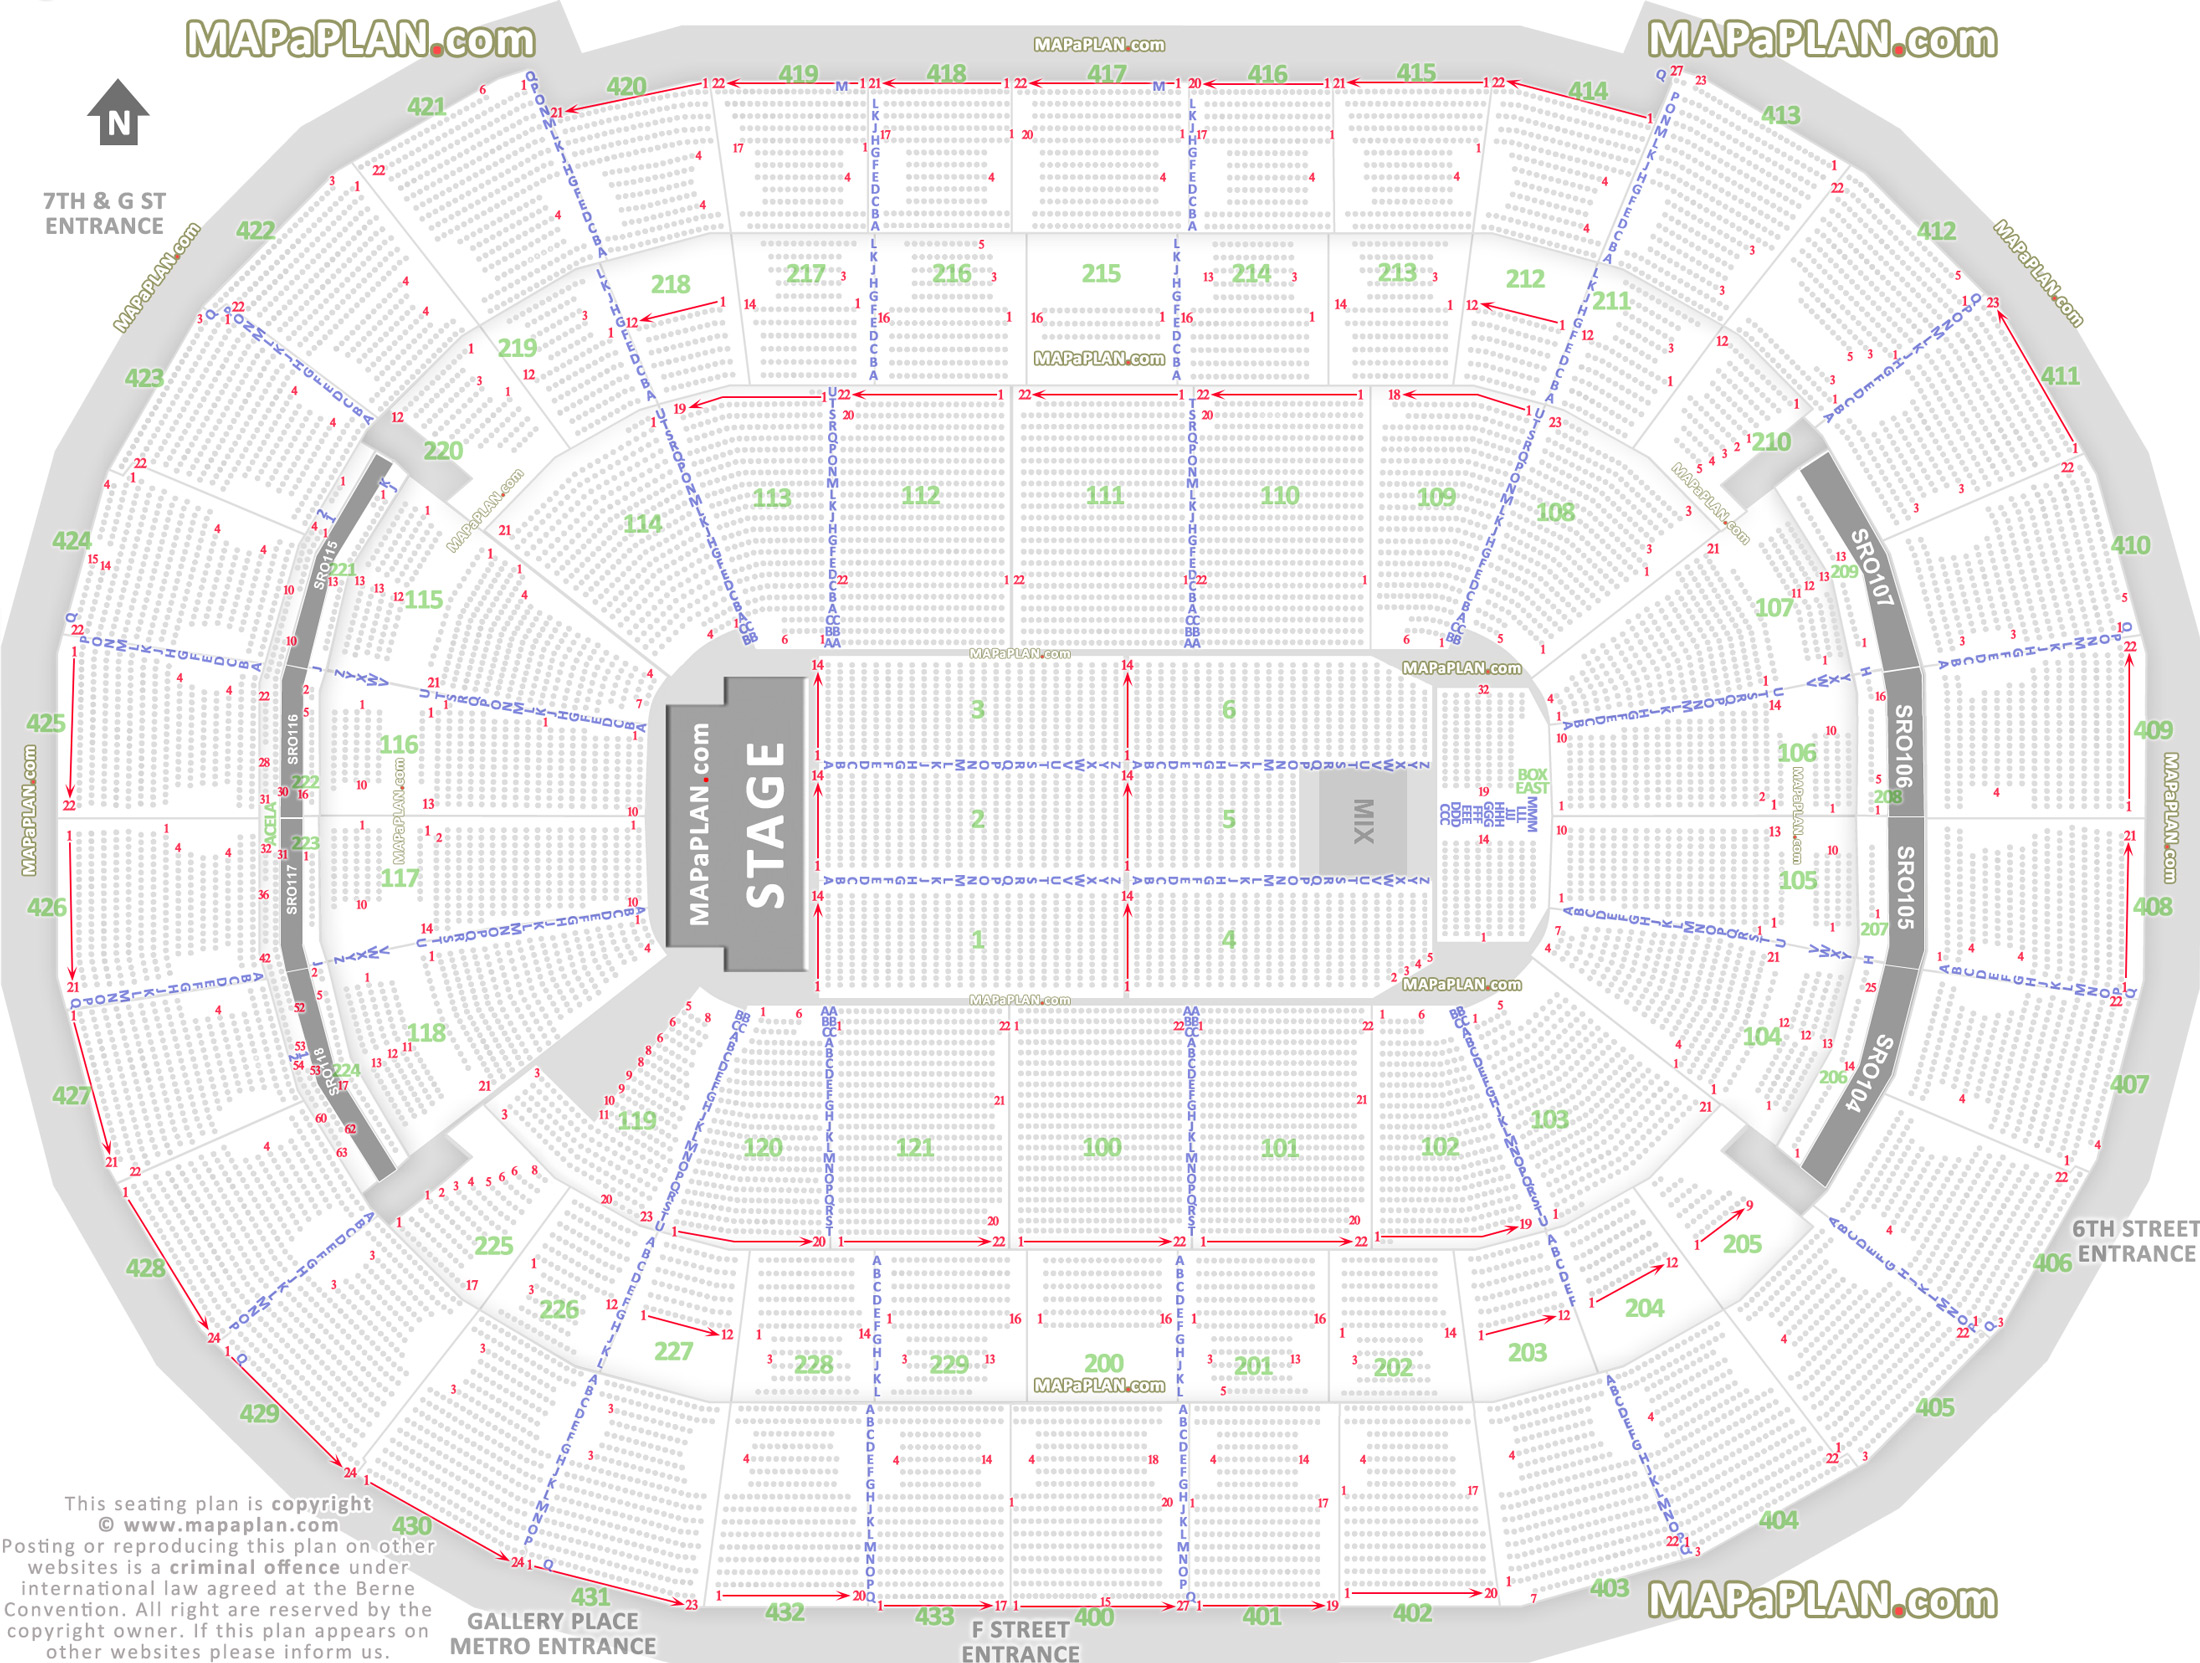 detailed seat row numbers end stage full concert sections floor plan arena main concourse club upper level layout Washington DC Verizon Center seating chart